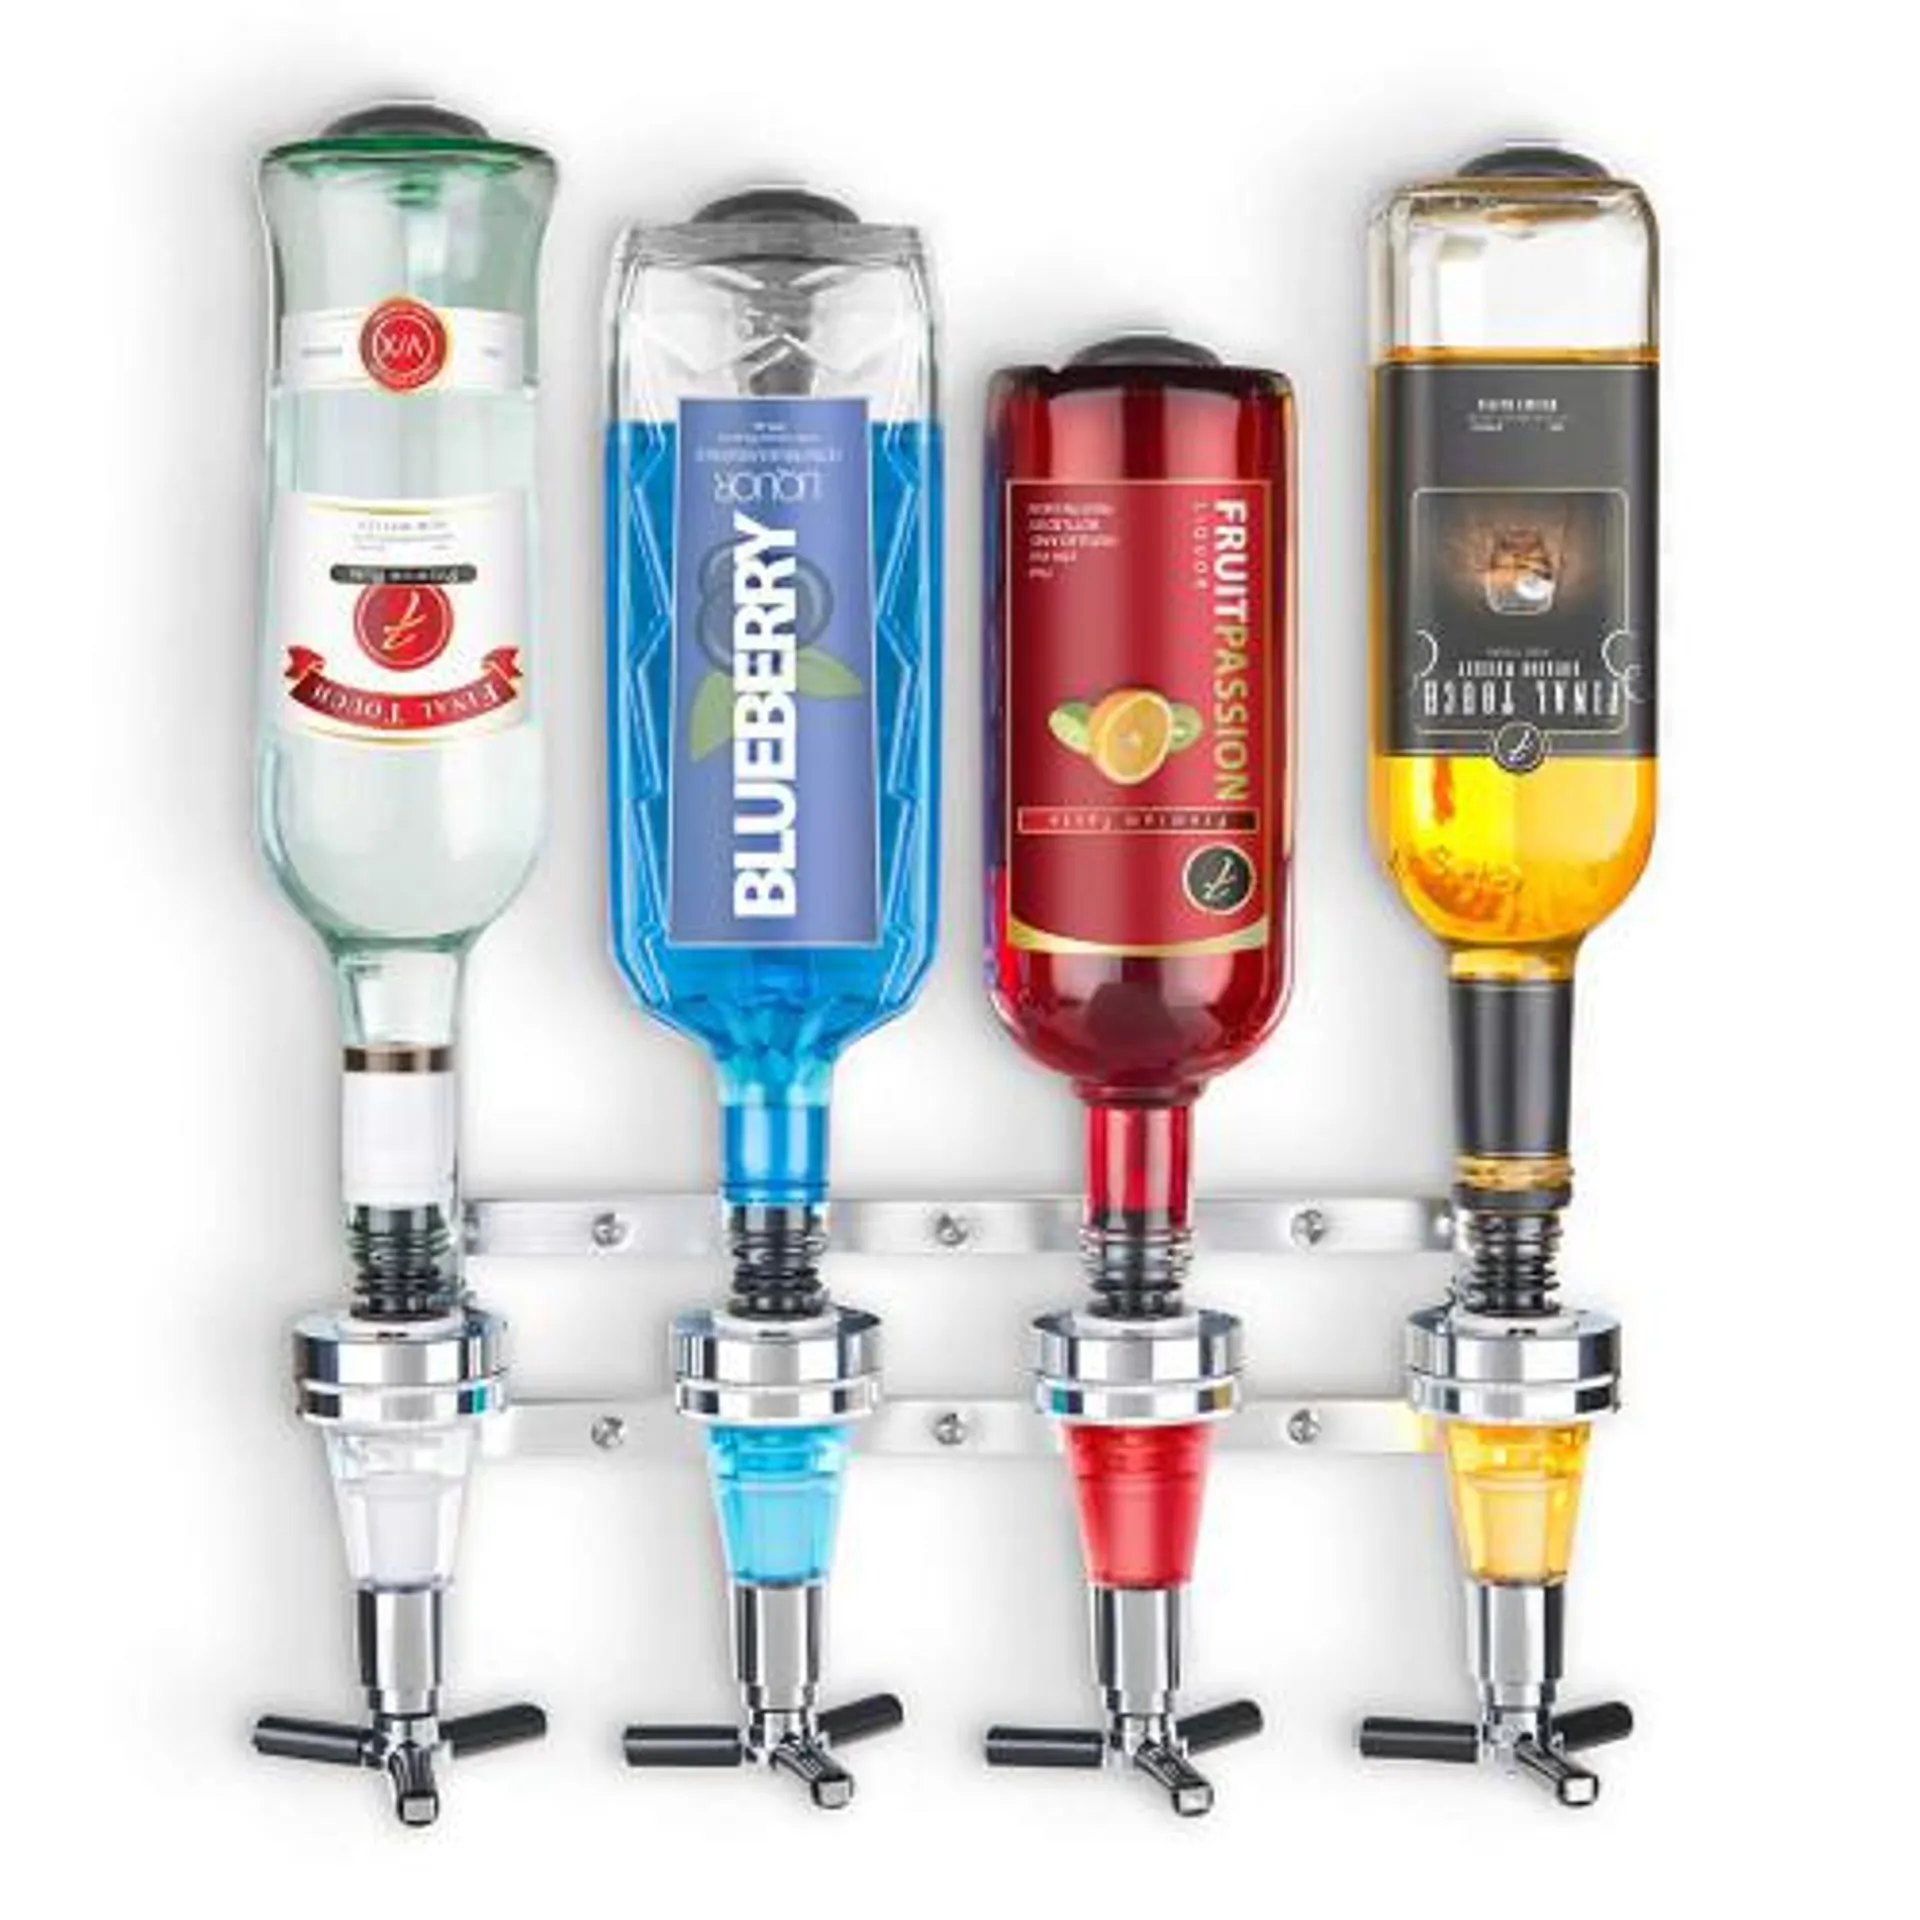 4-Bottle Wall Mounted Drinks Dispenser by Final Touch